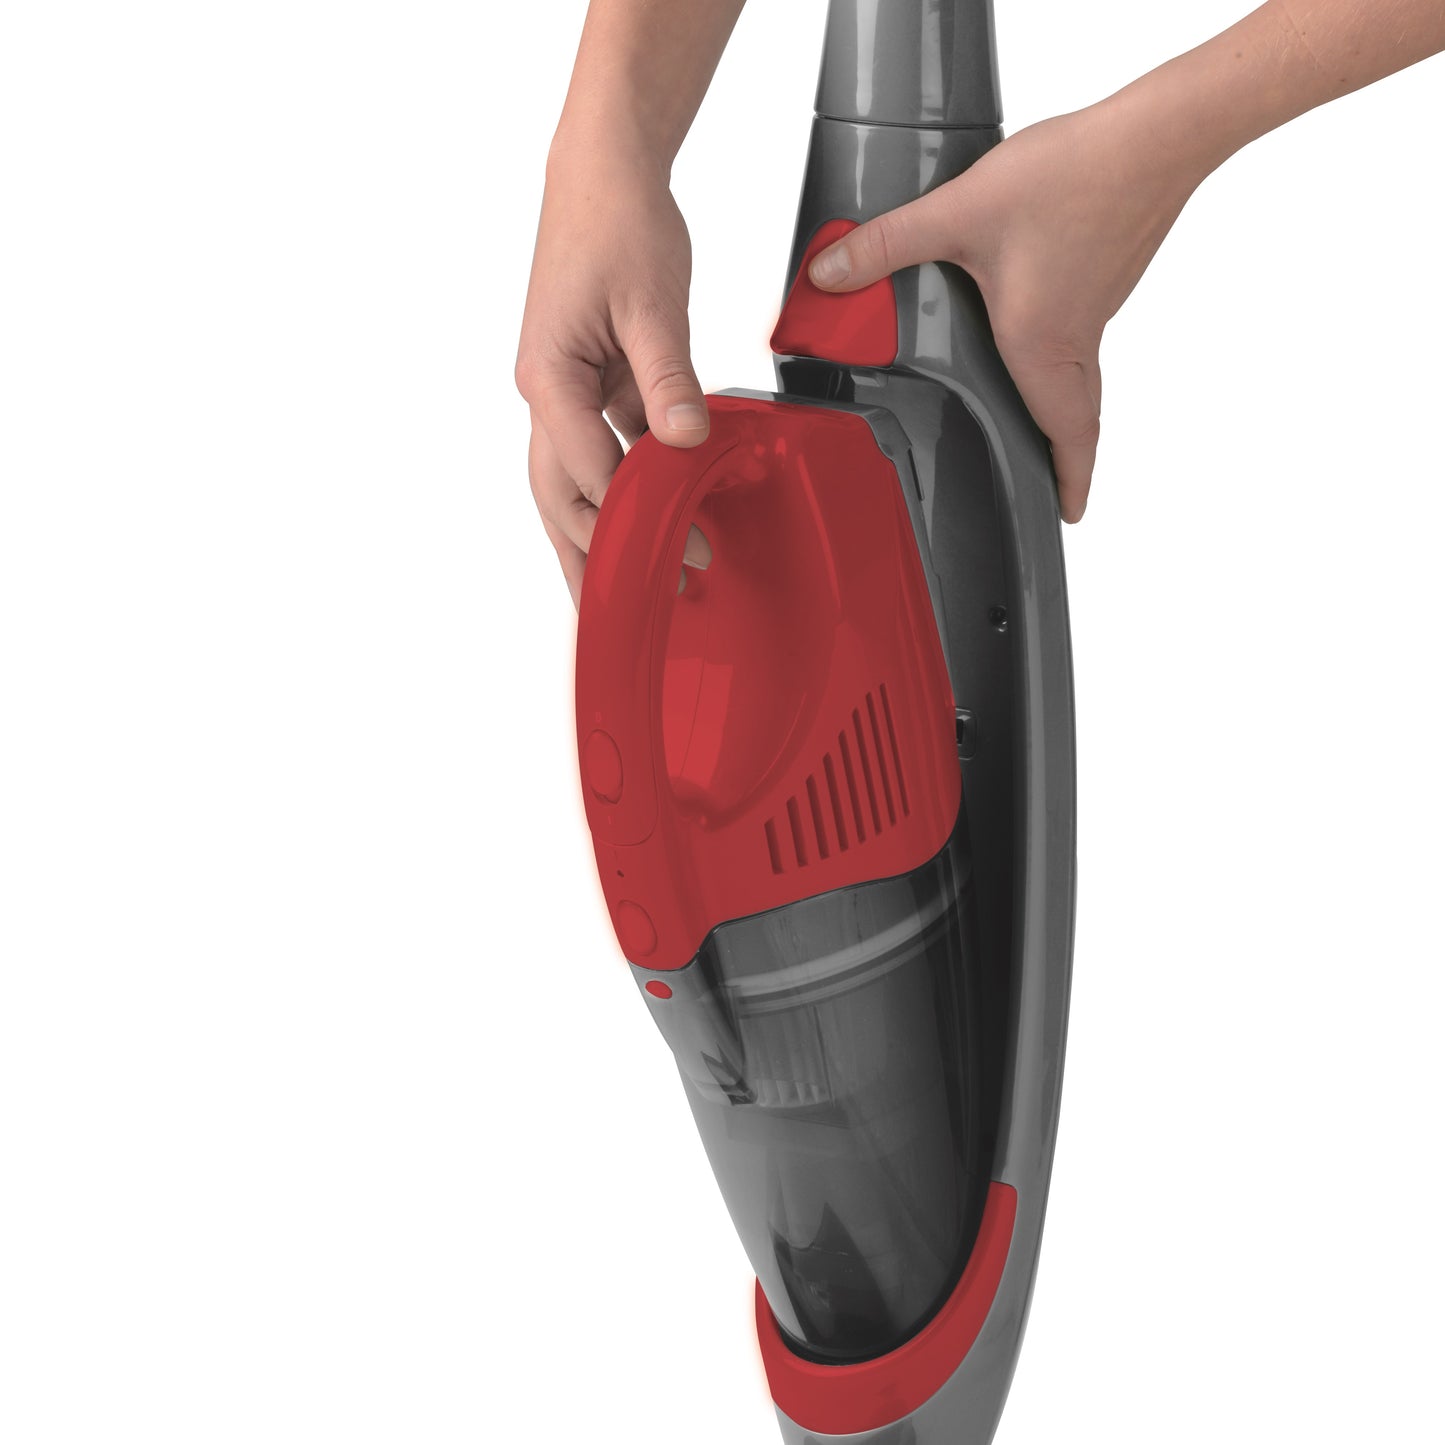 Montiss CVC639 Chicago - Cordless, Rechargeable 2-in-1 Vacuum Cleaner with turbo brush and without dust bag, red